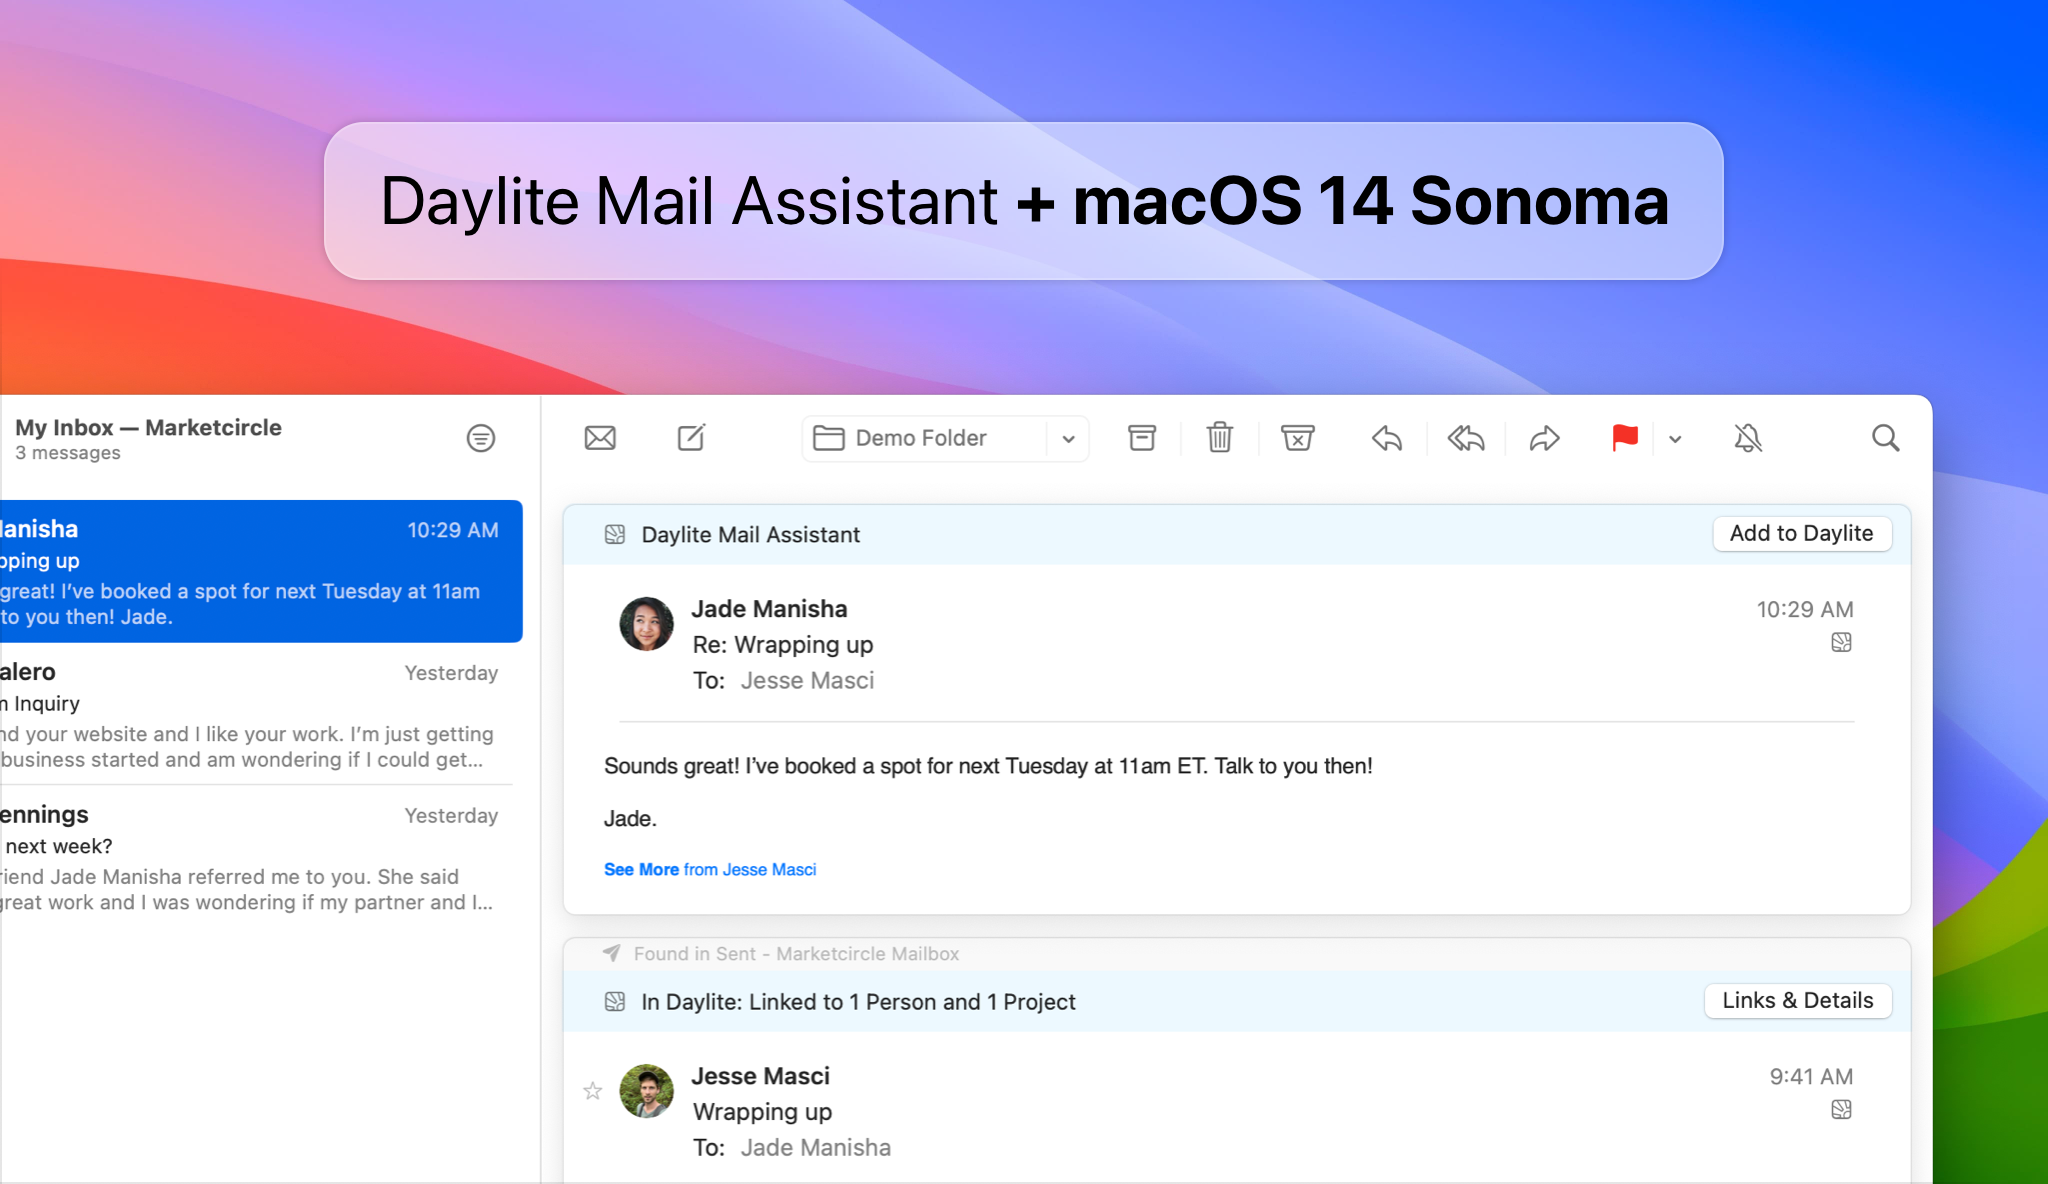 Writing Assistant for Apple Mail and Notes (macOS)